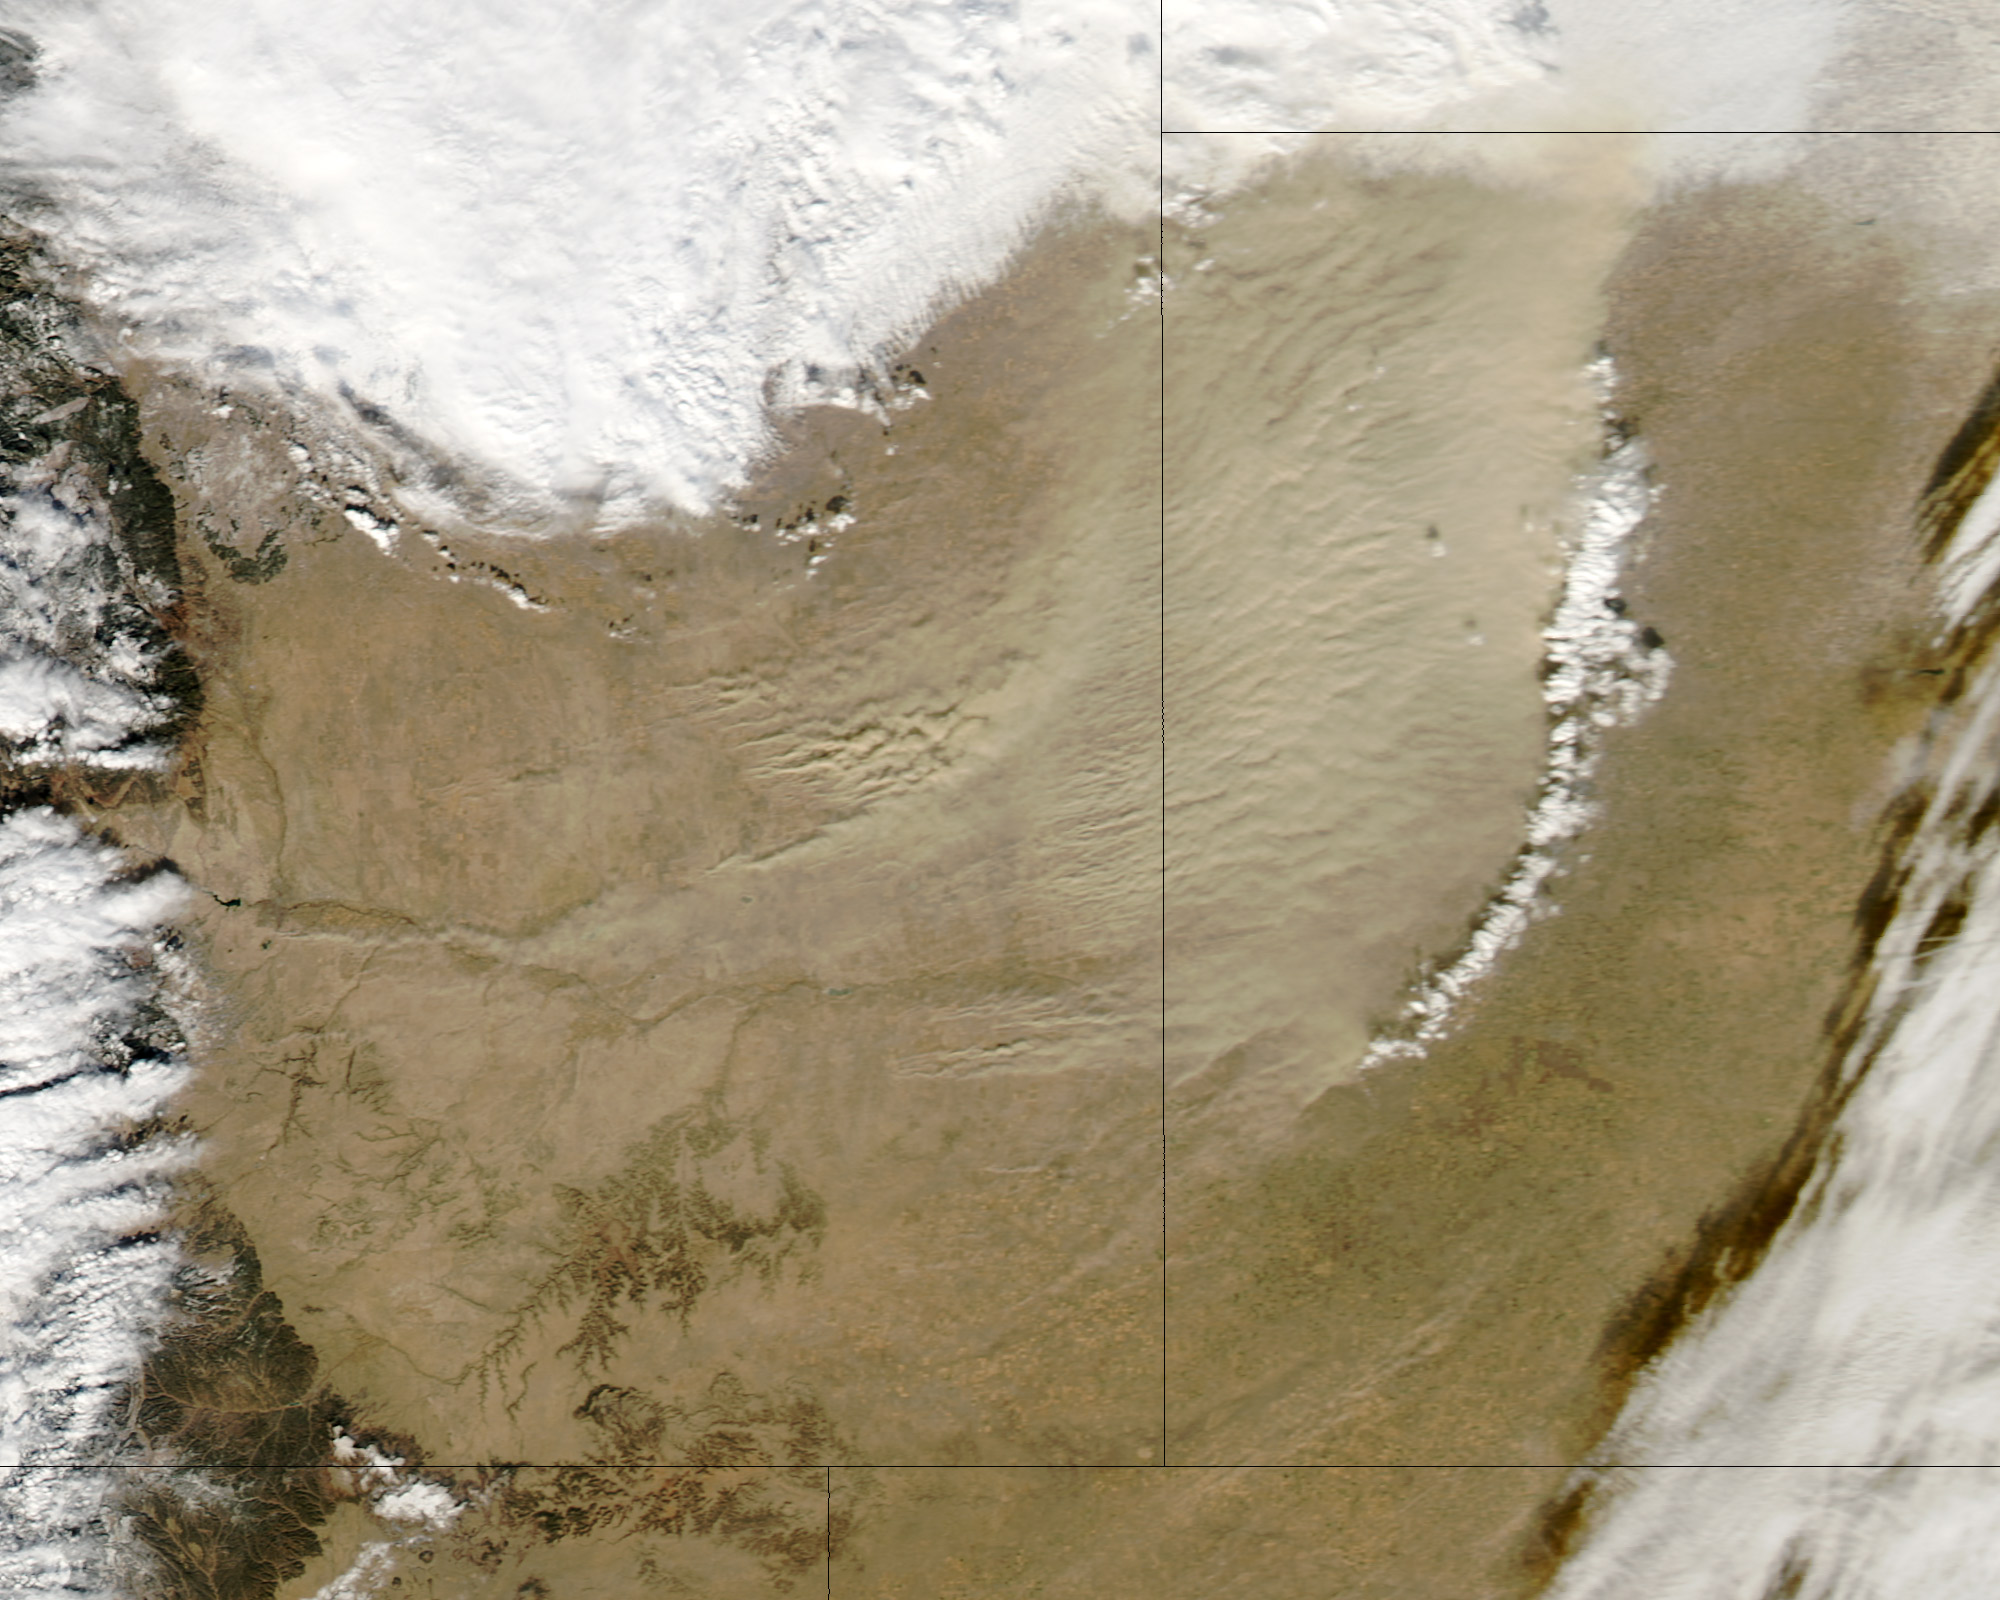 Dust Storm in Colorado and Kansas - related image preview